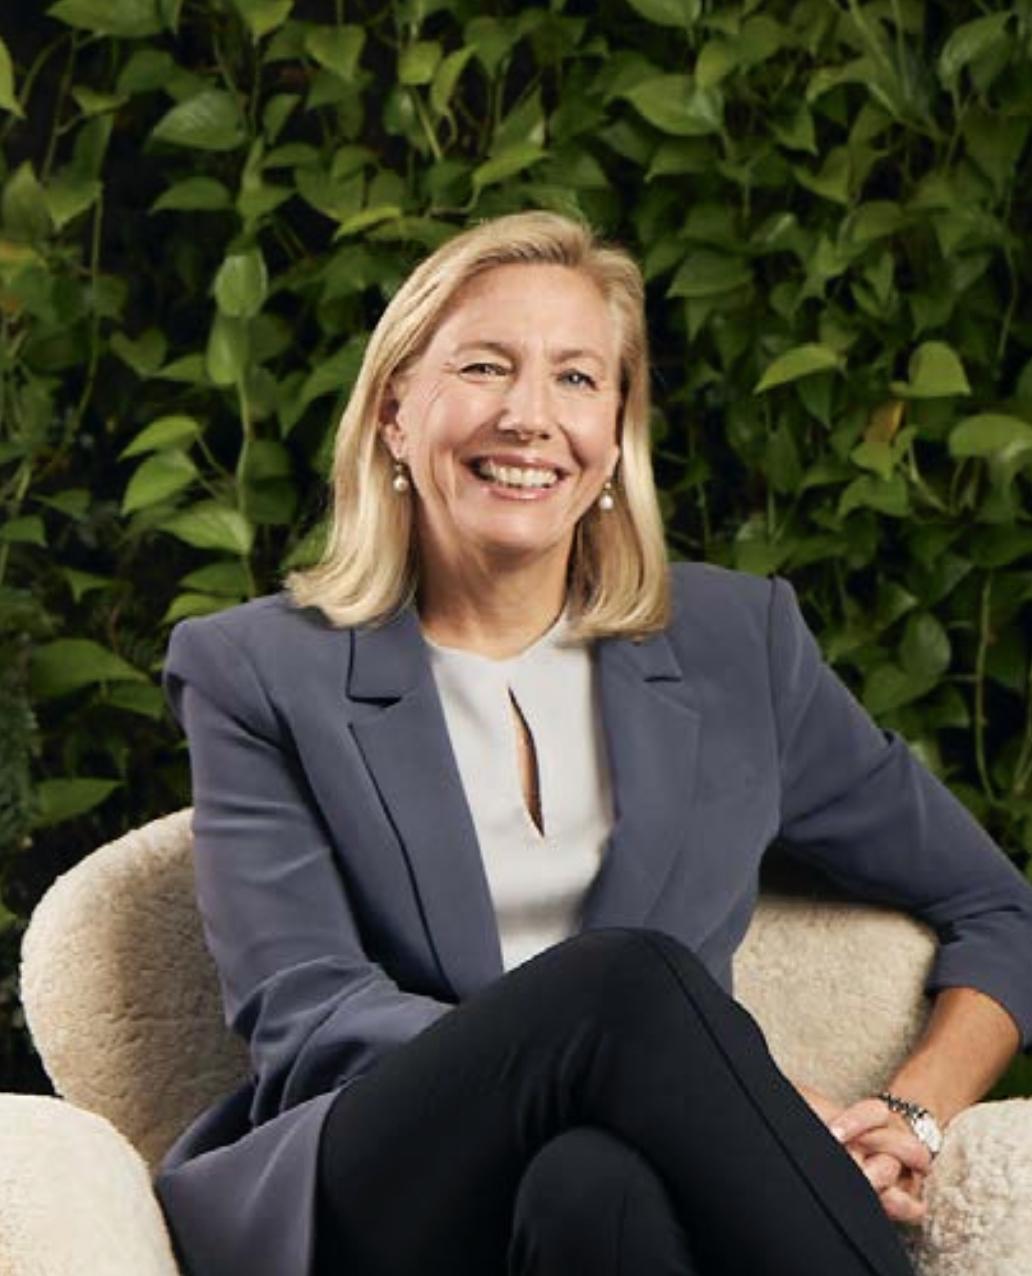 Joanne C. Crevoiserat, Tapestry, Inc. Chief Executive Officer